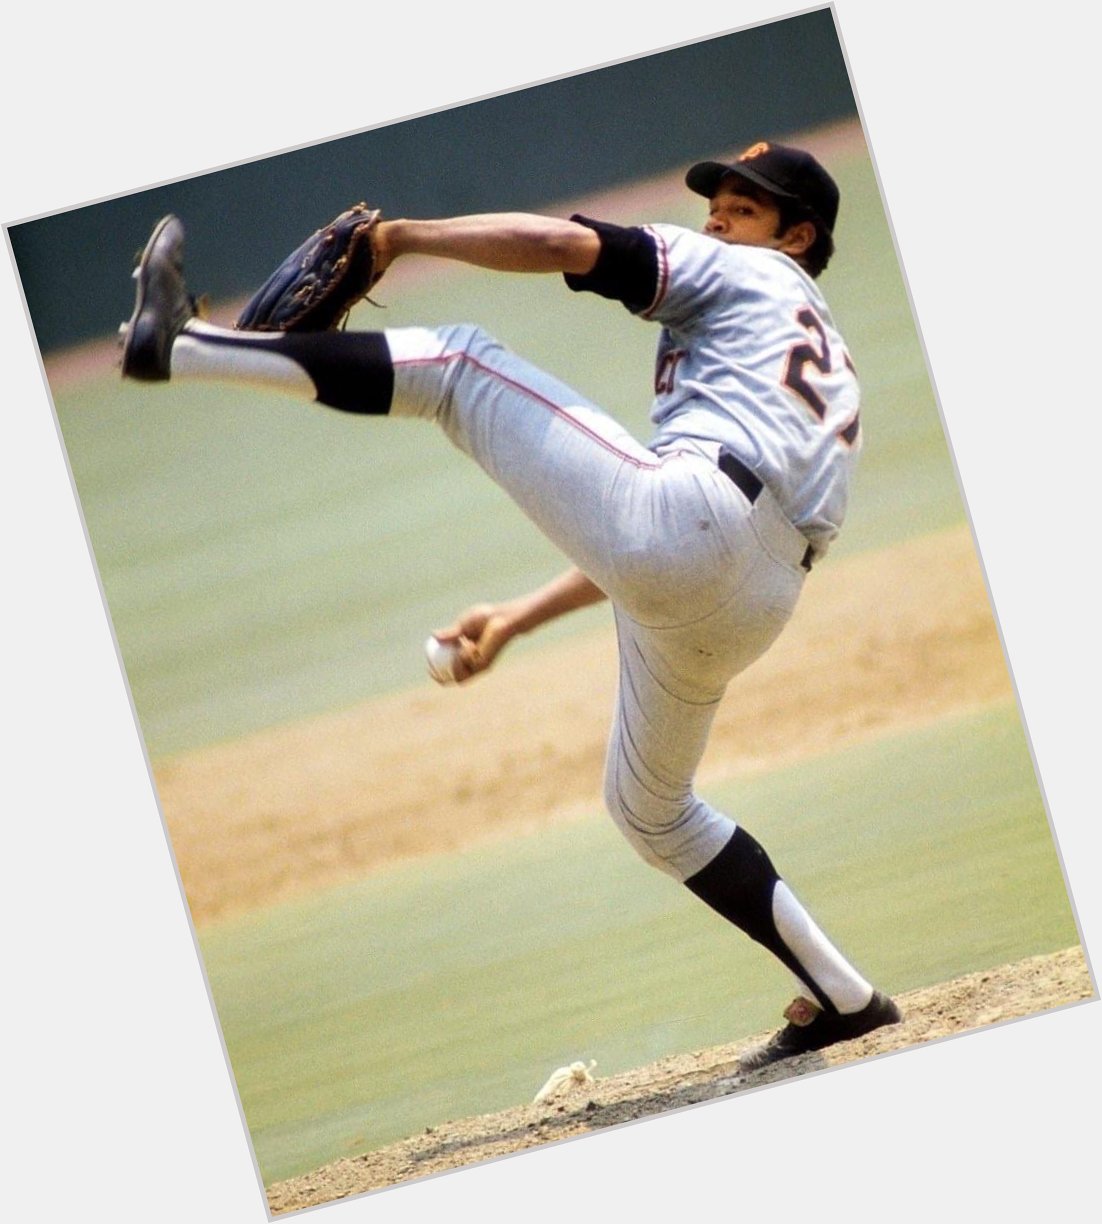 Happy 85th birthday to \"The Dominican Dandy\" of the San Francisco Giants, former Giants pitcher Juan Marichal! 